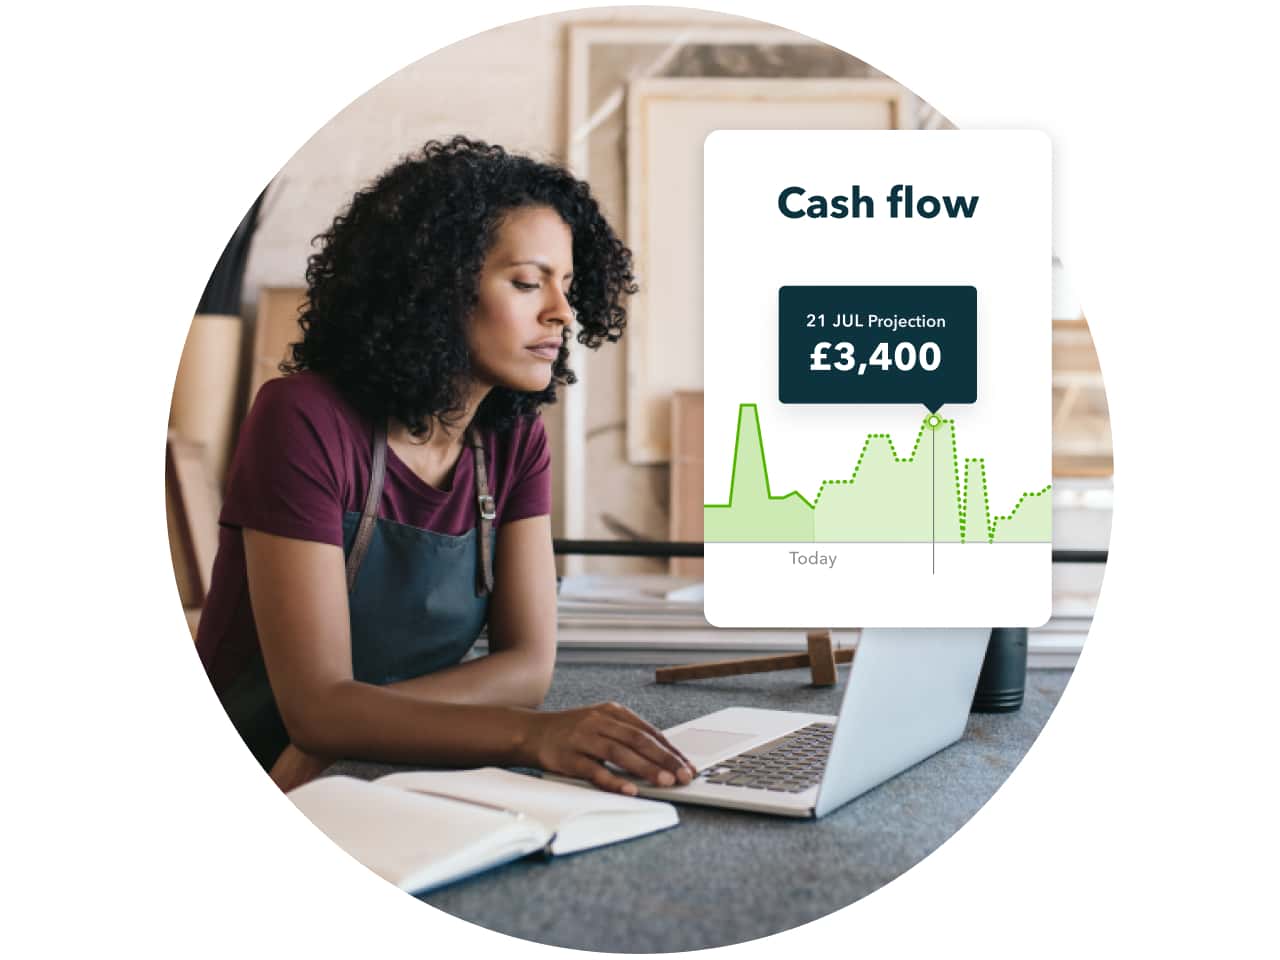 Take control of your cash flow